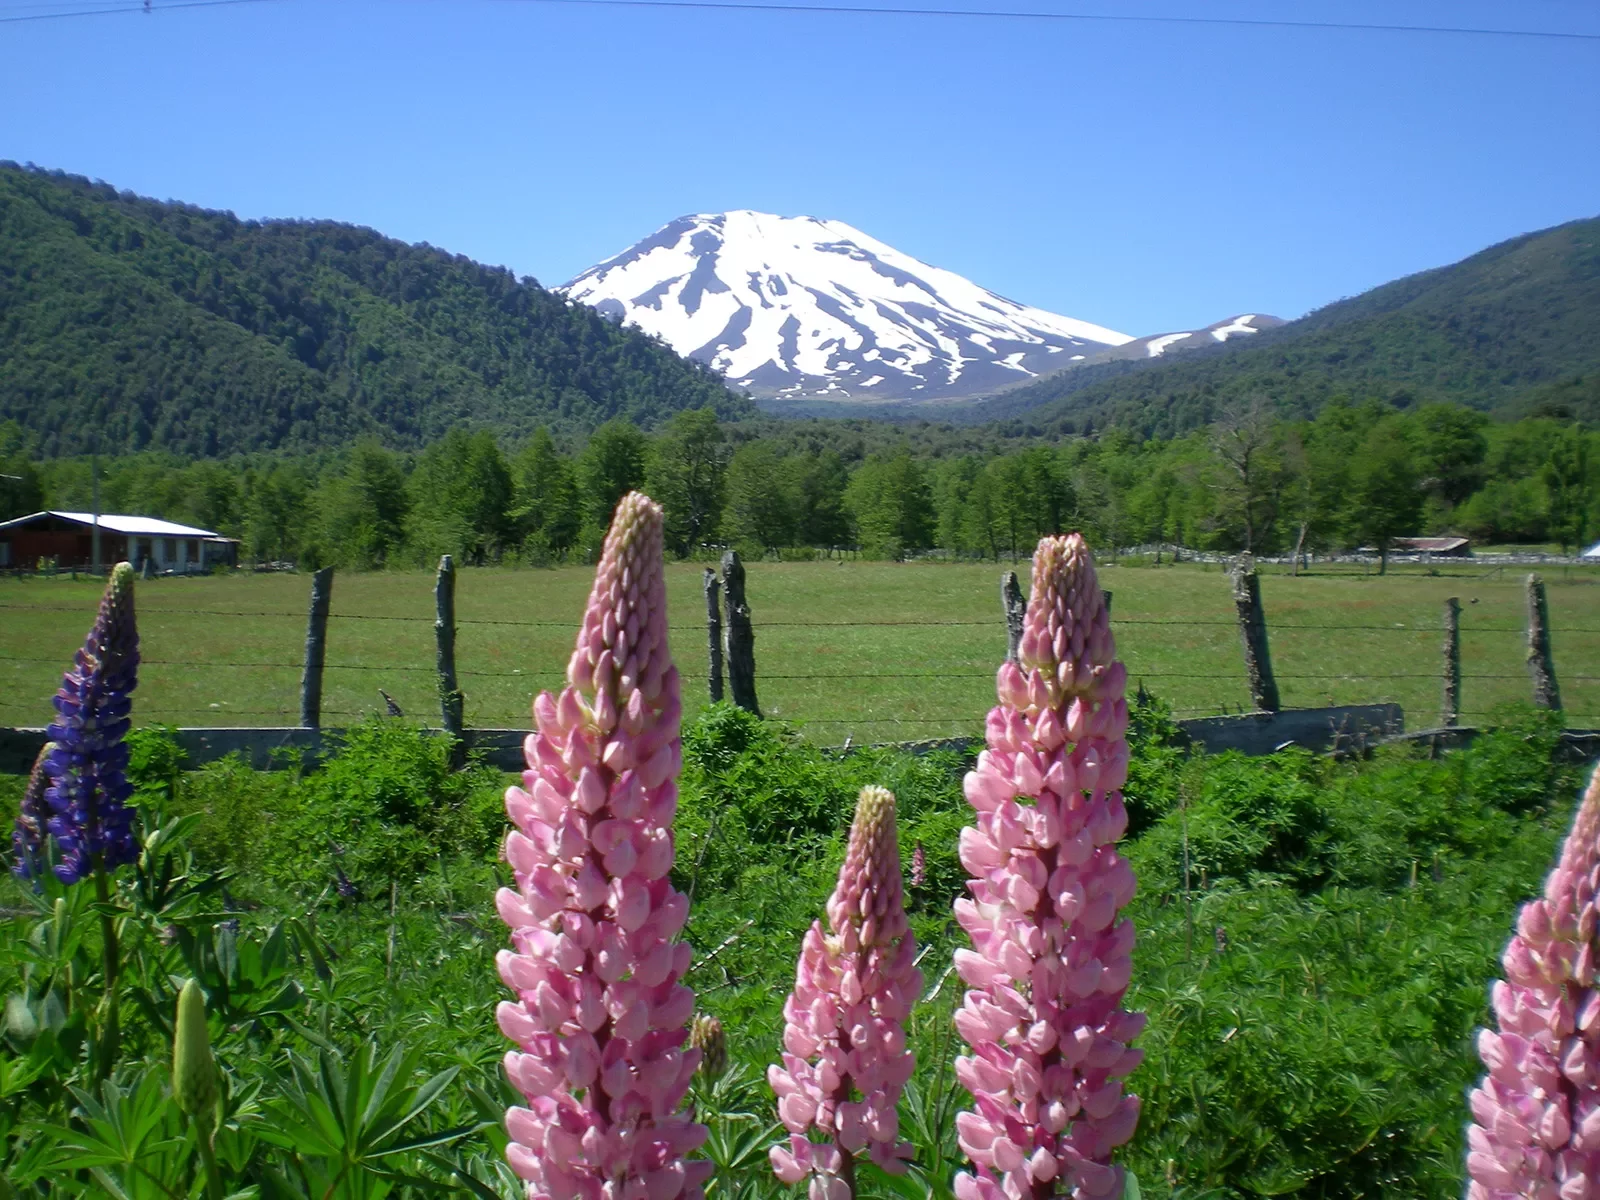 Wide shot of mountain valley, snowy peak in background, pink flowers in foreground.